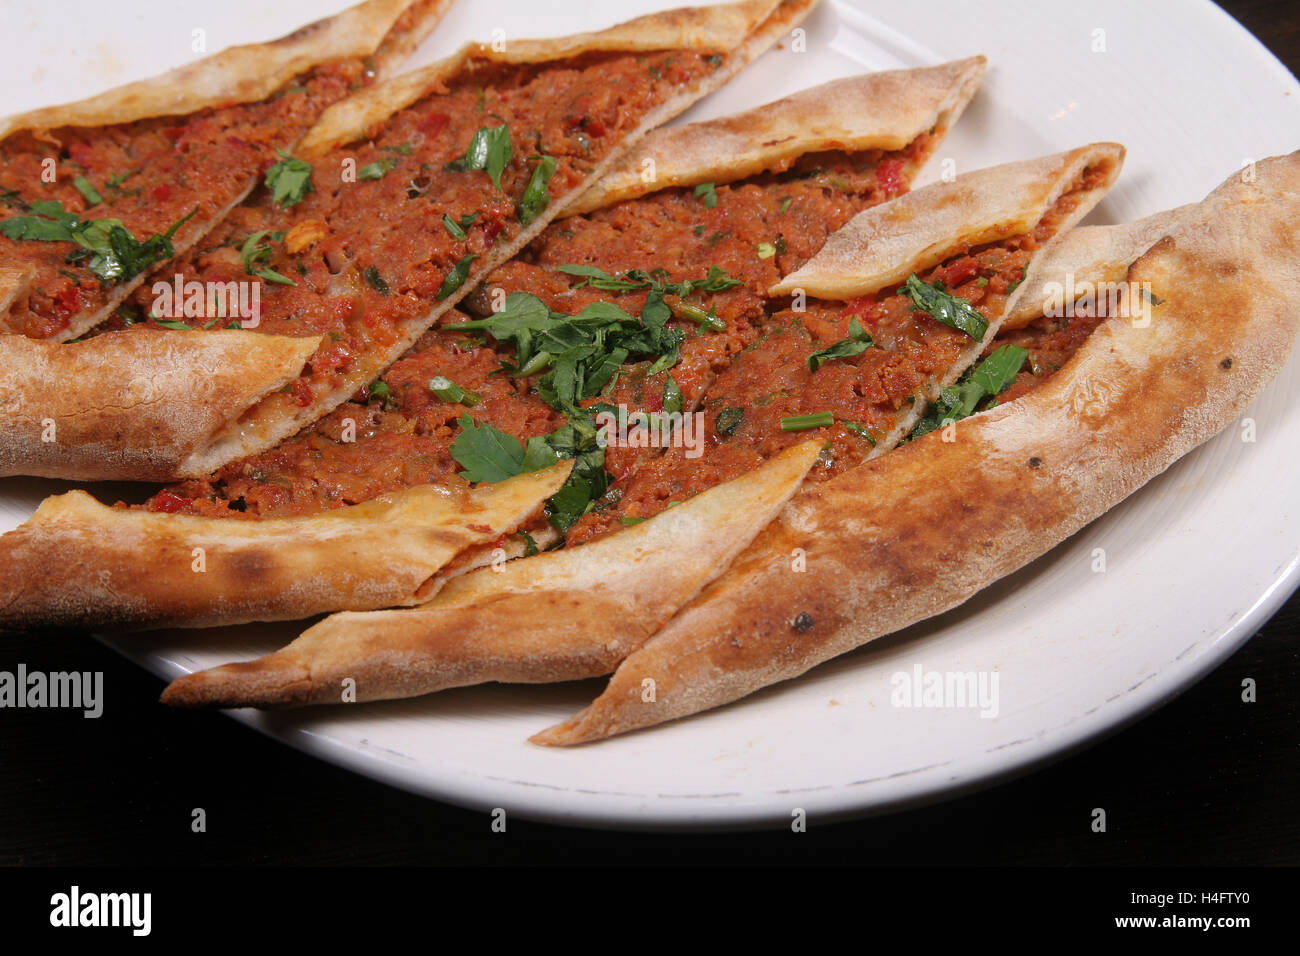 Turkish pizza (pide) with mınced meat Stock Photo